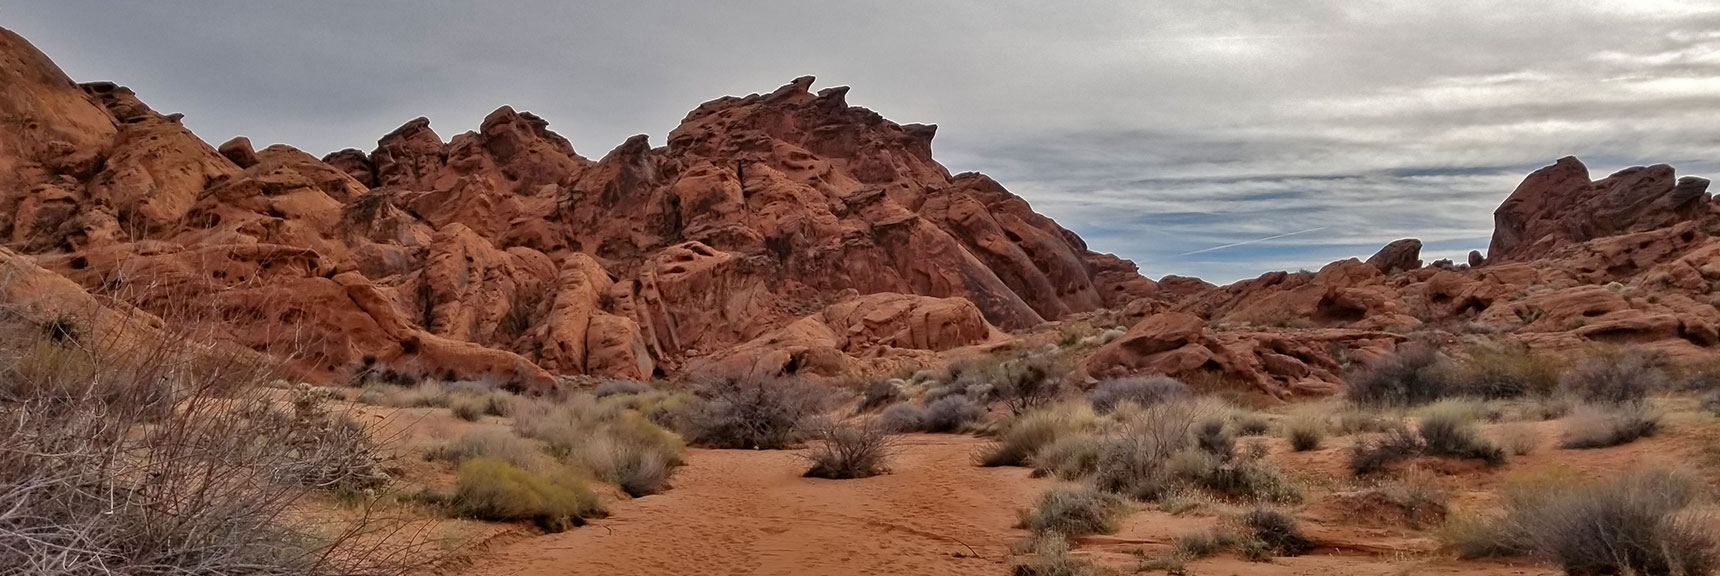 Without the Plants This Is the Planet Mars in Fire Canyon in Valley of Fire State Park, Nevada